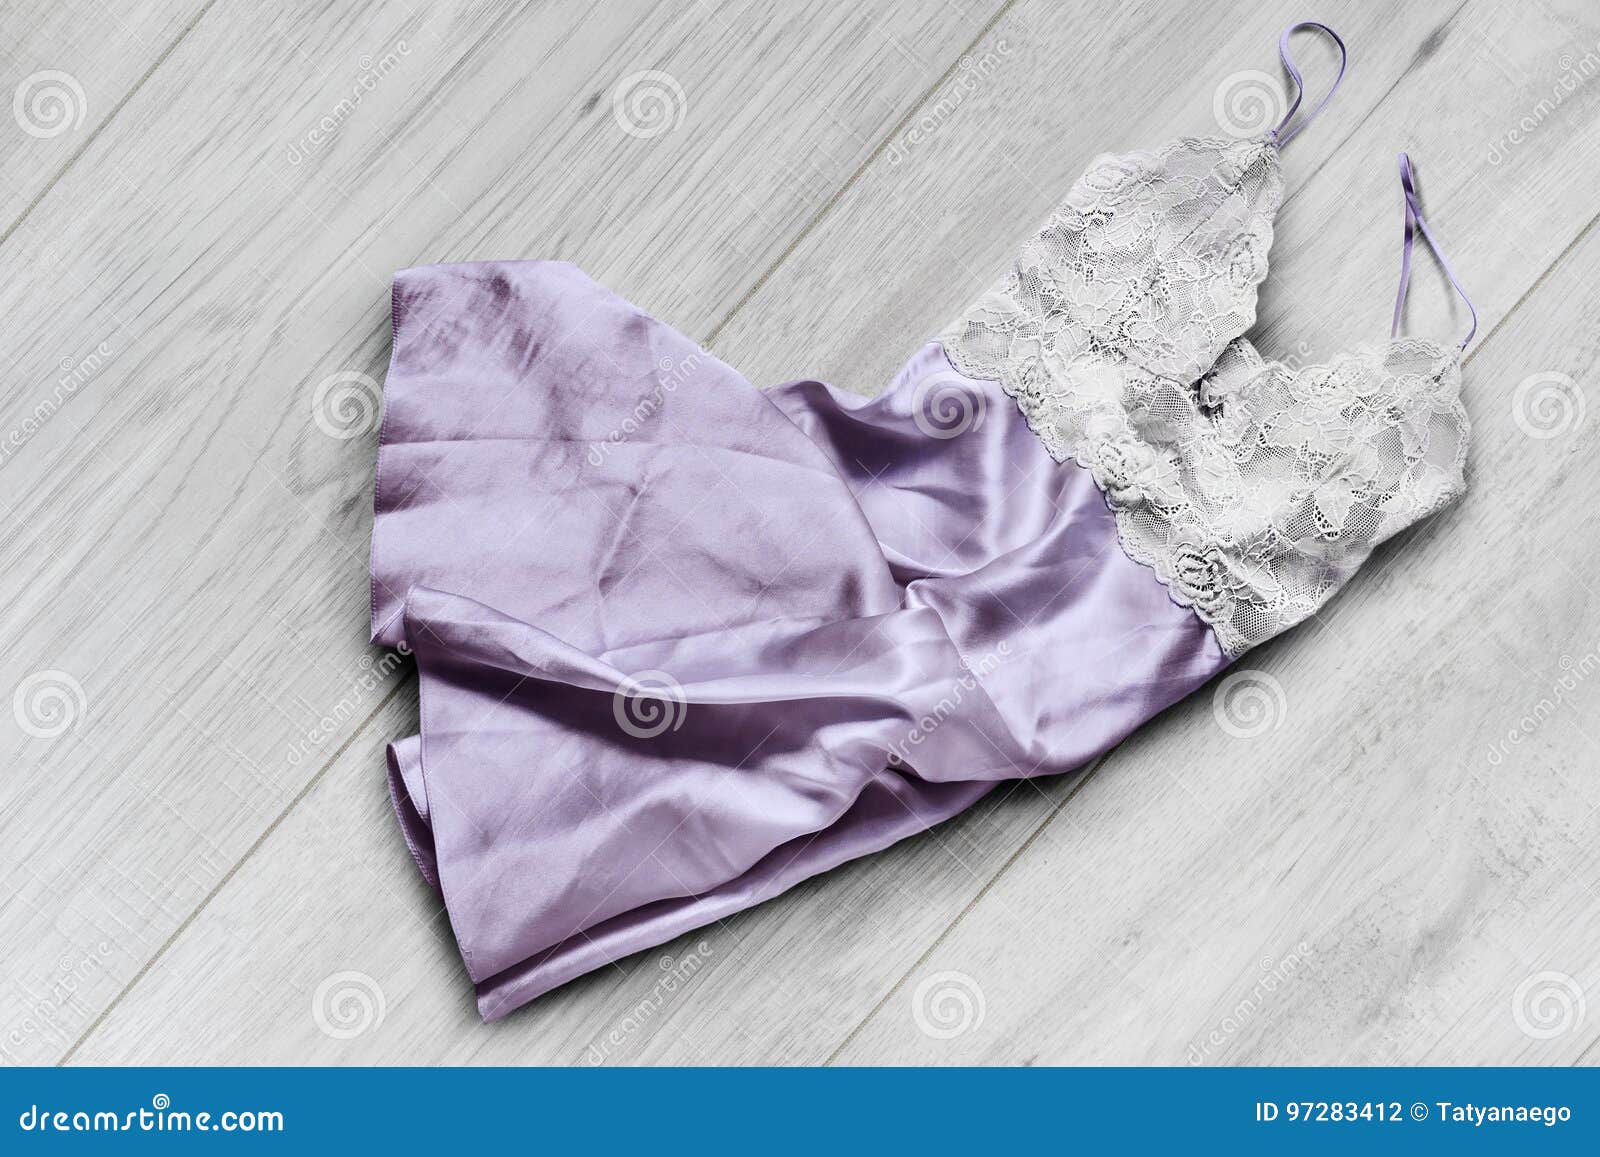 Dress on wooden background stock photo. Image of style - 97283412